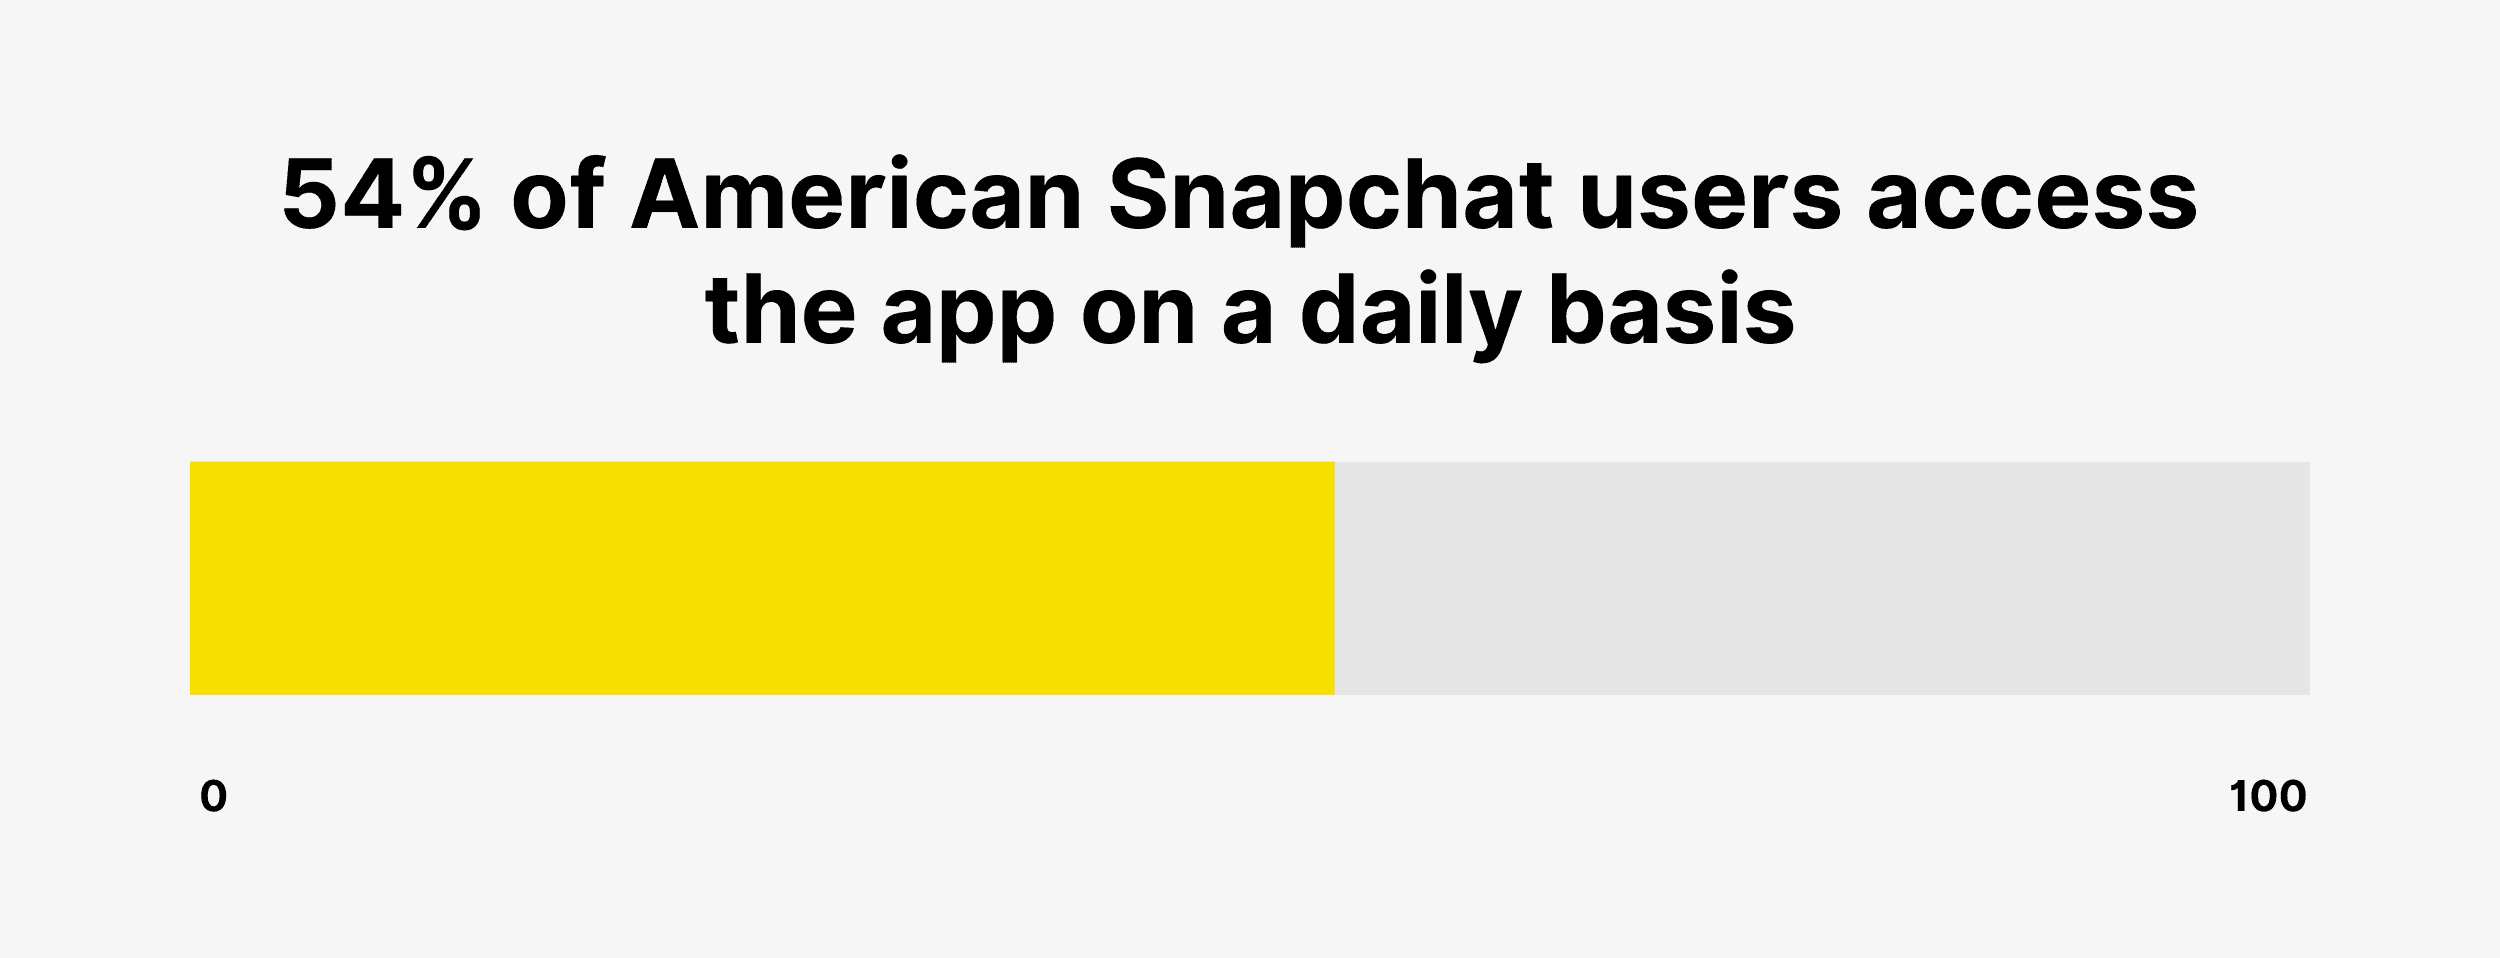 54% of American Snapchat users access the app on a daily basis